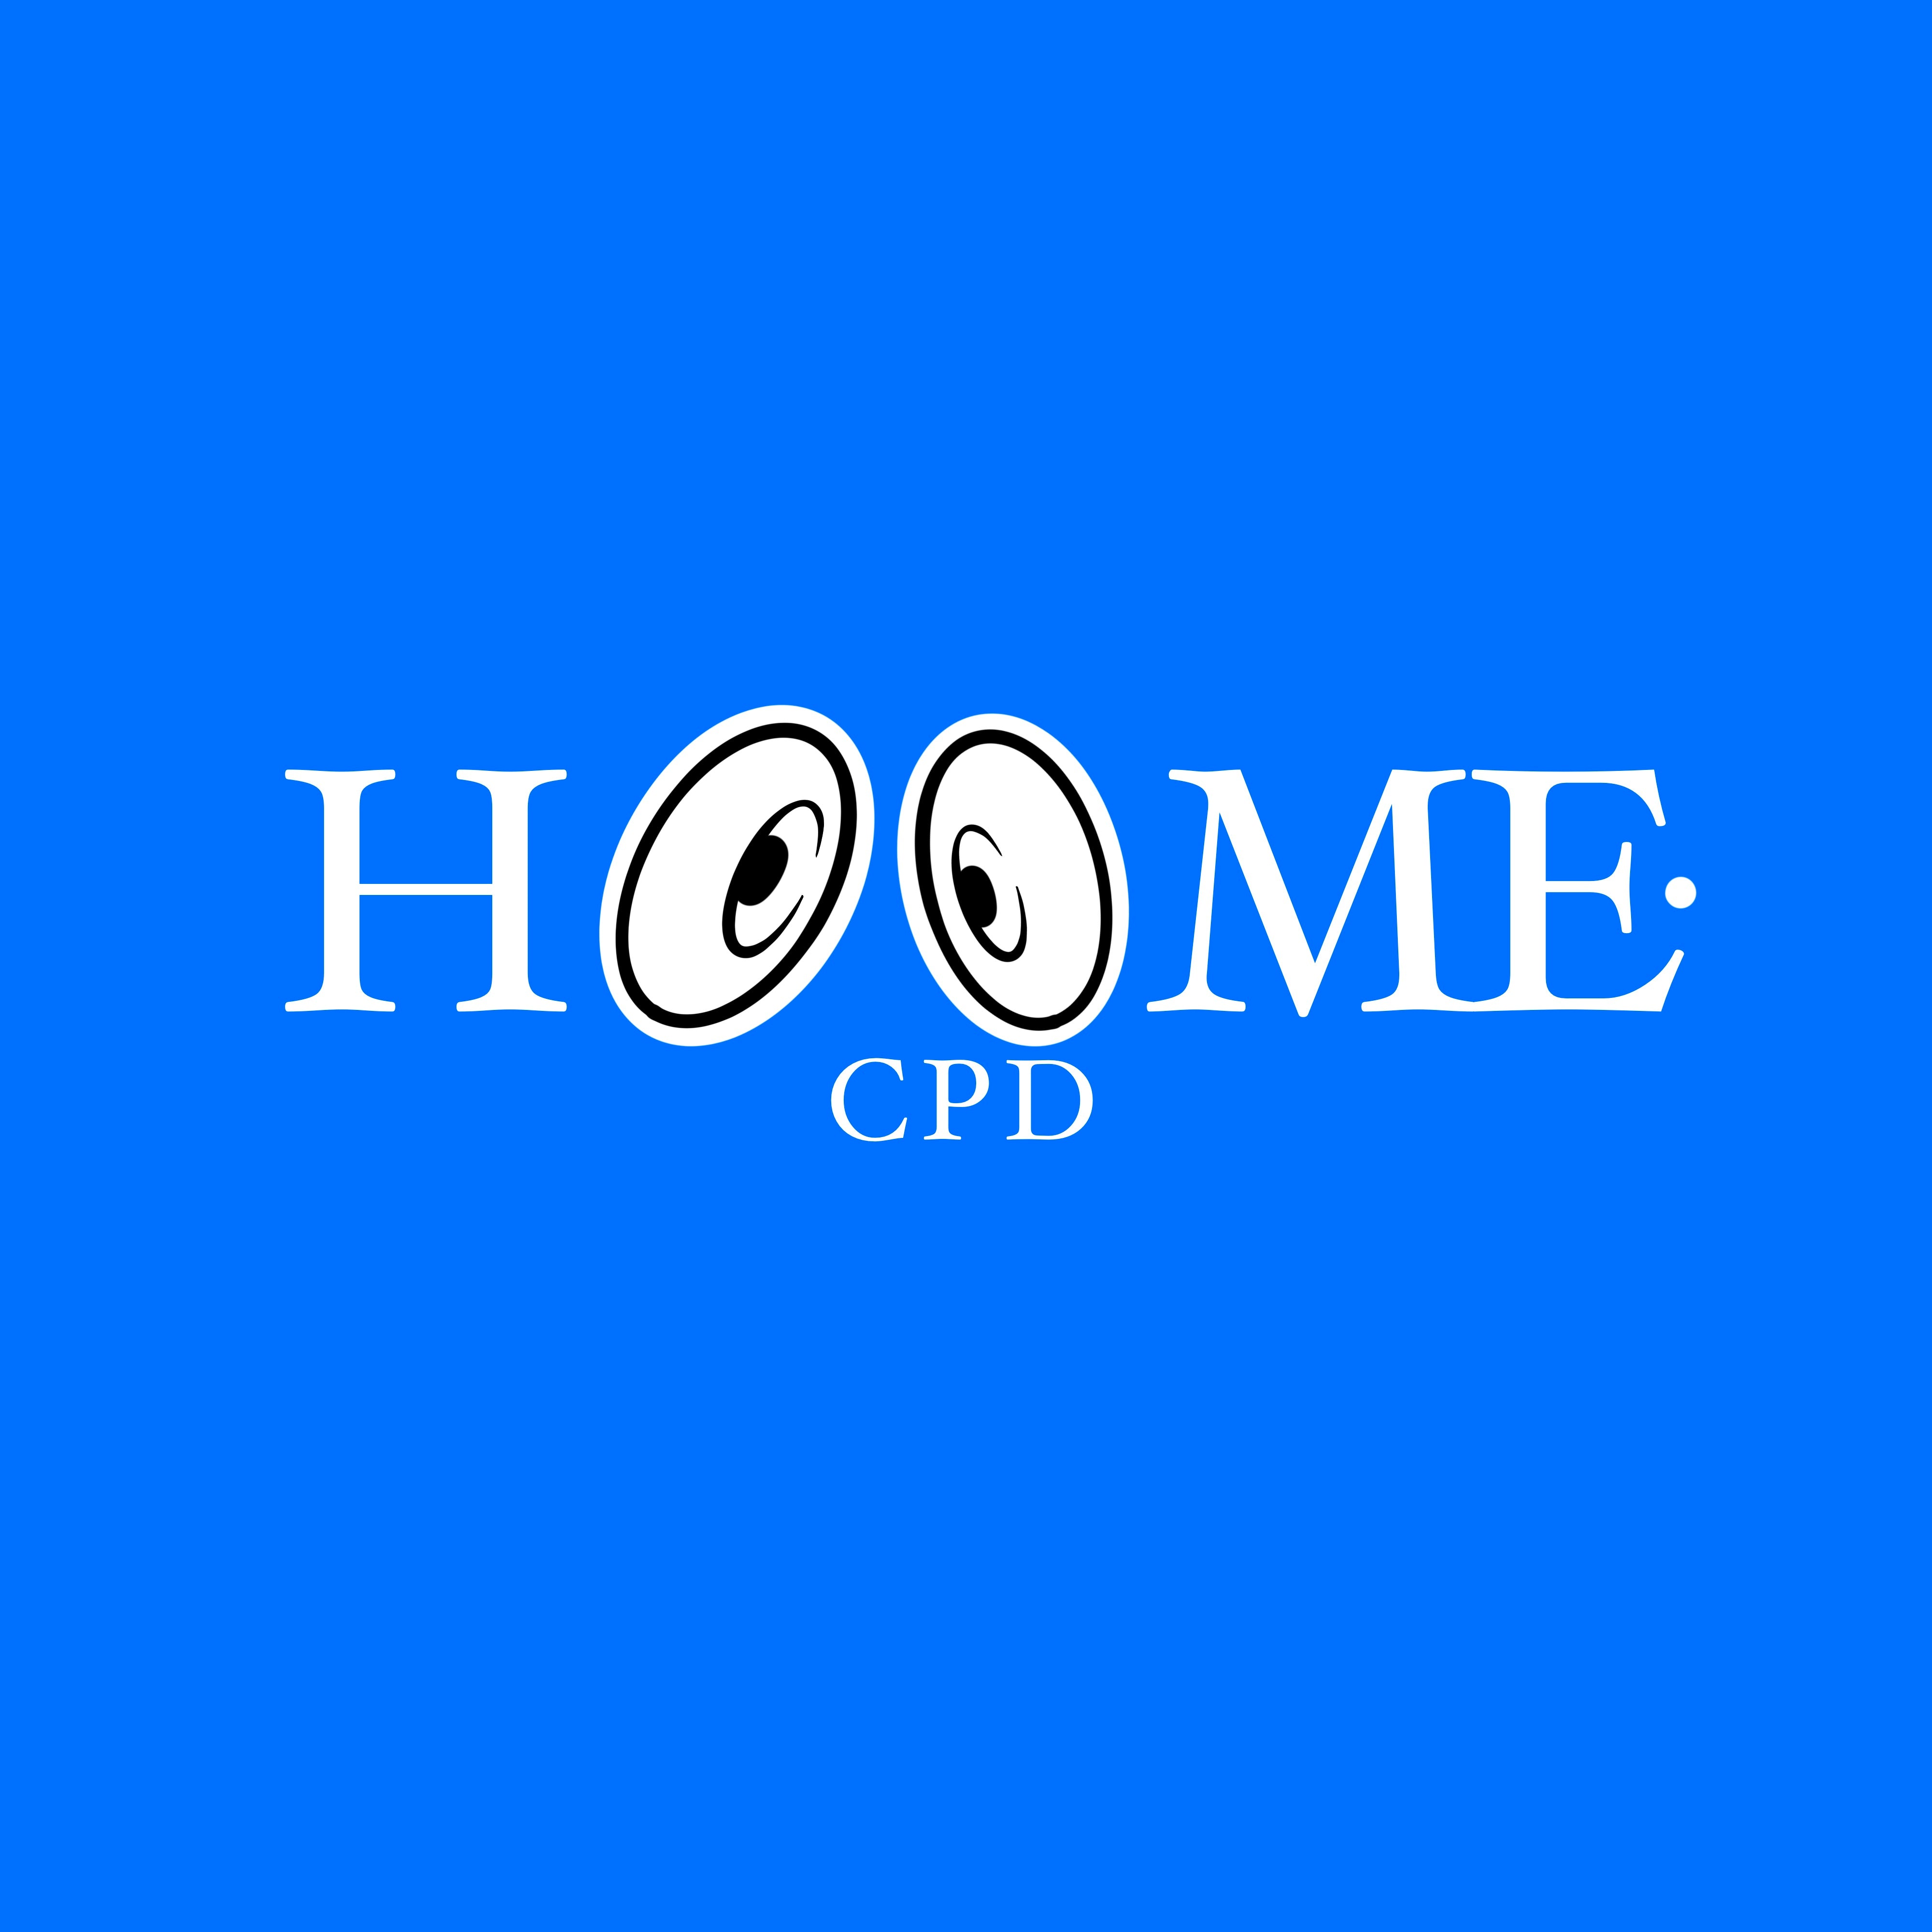 CPDHOOME – COIN PARKING DELIVERY